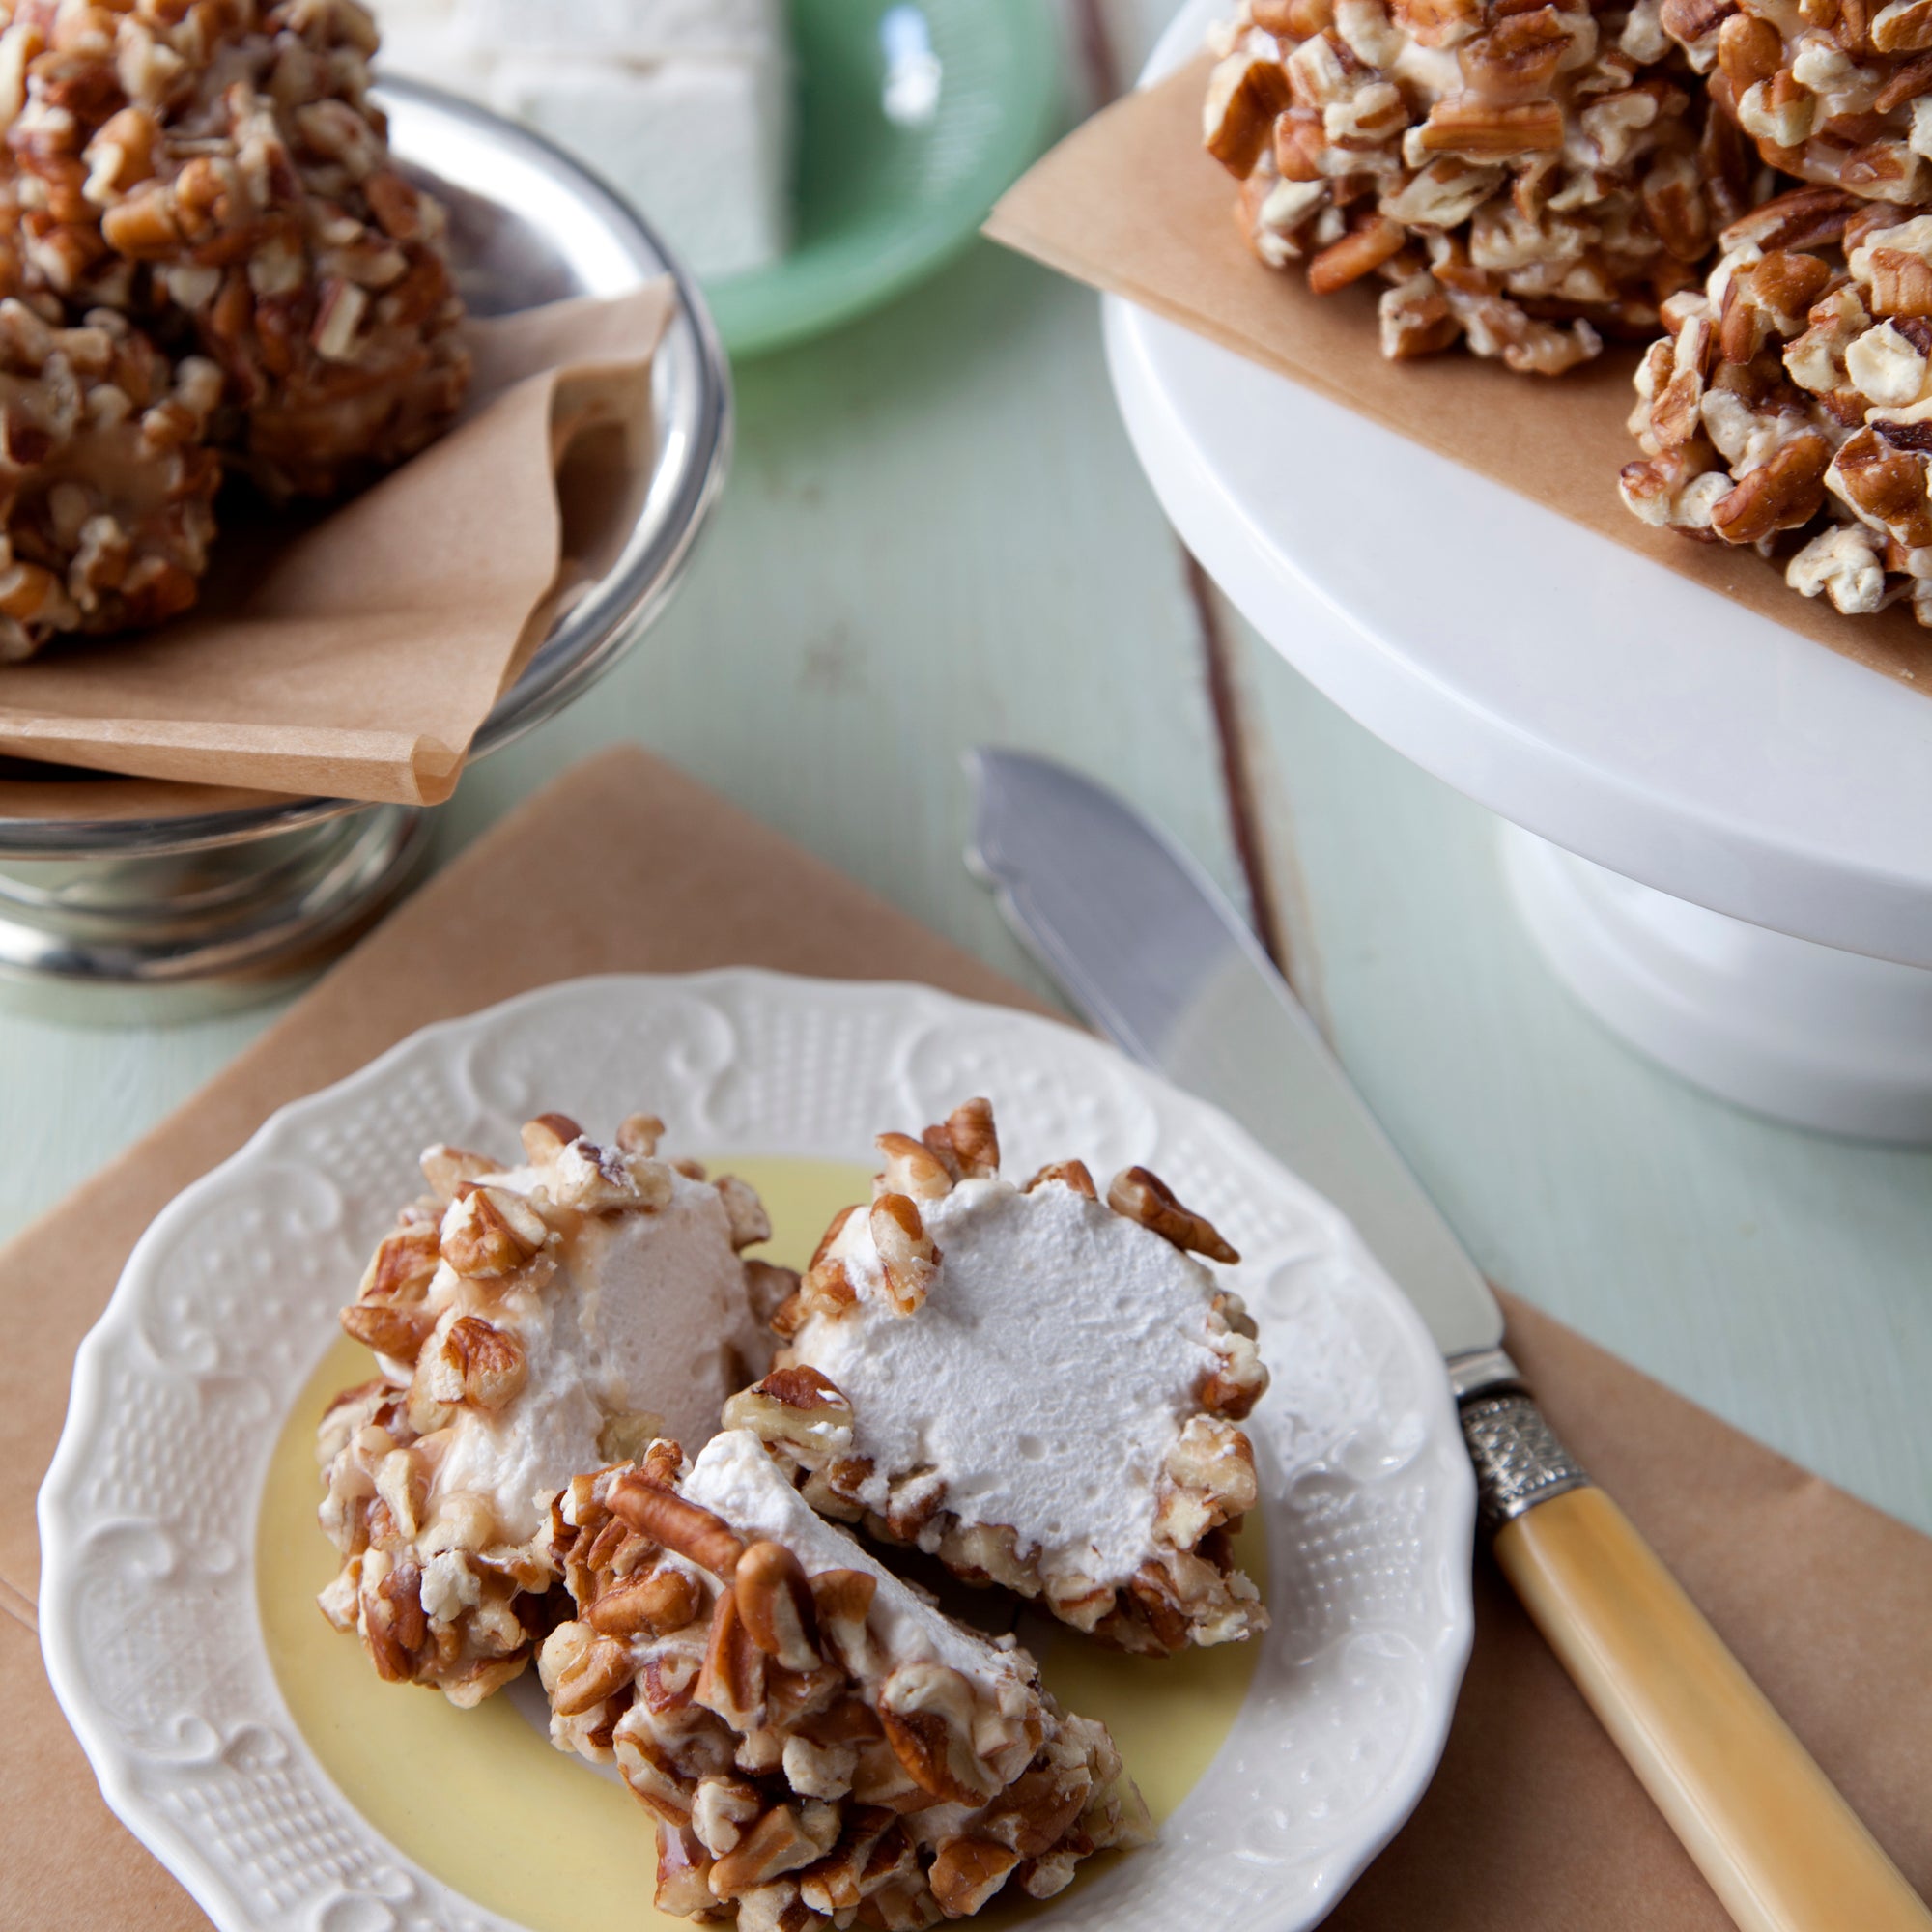 Gone to Heavens are made with marshmallow, caramel and pecans. 